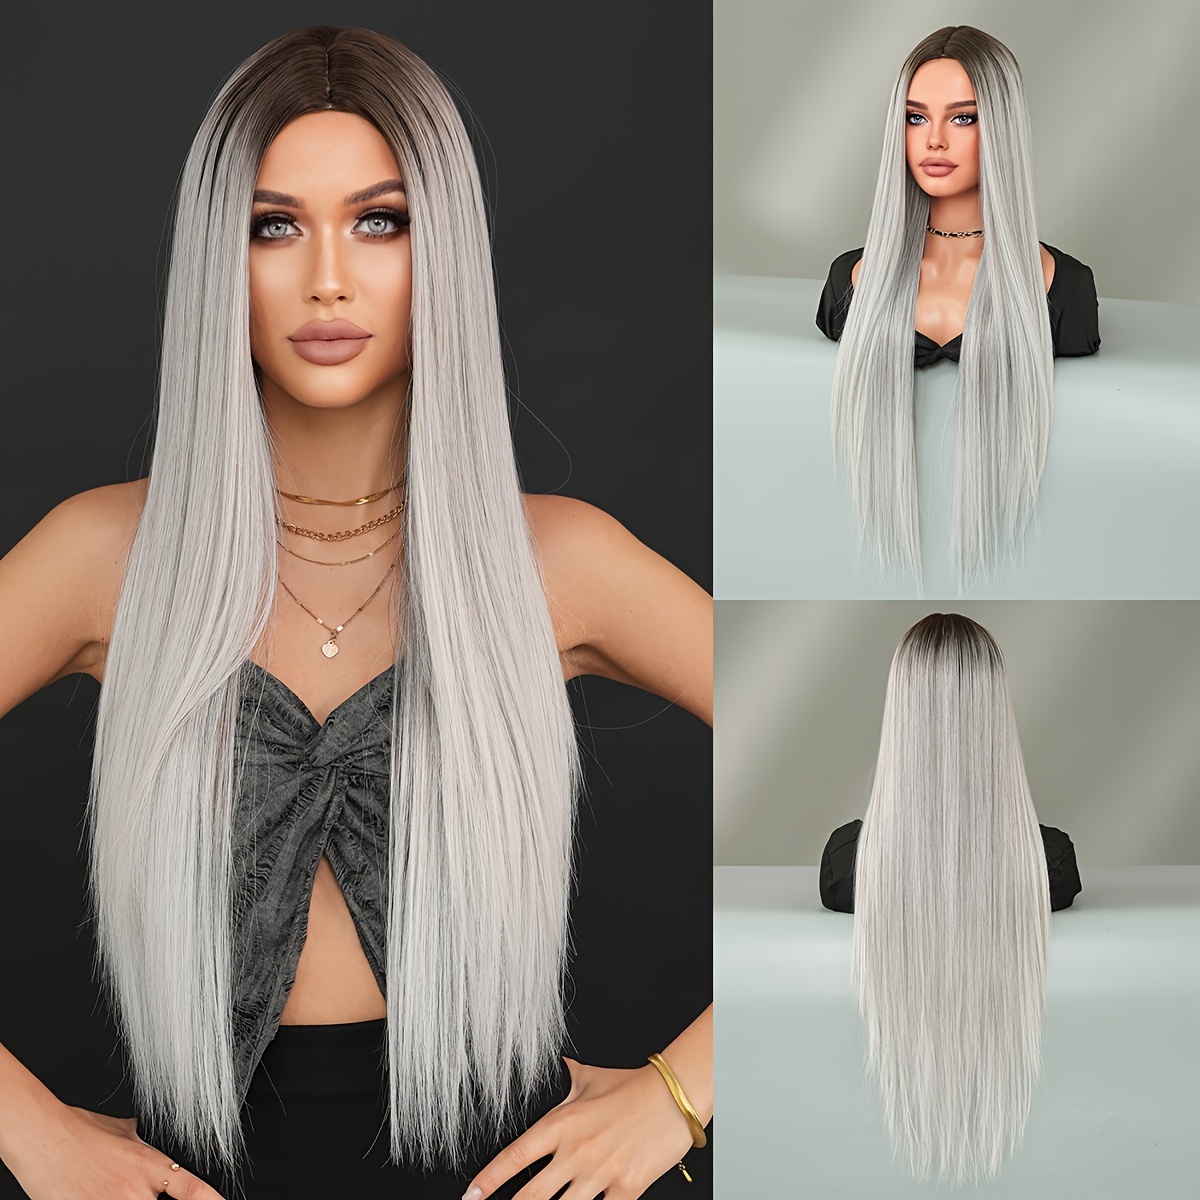 

Chic Ombre Silvery White Wig With Dark Roots - High Density, Heat Resistant Synthetic Hair For Women | Perfect For Daily Wear & Parties | 31.49" Long Straight Middle Part